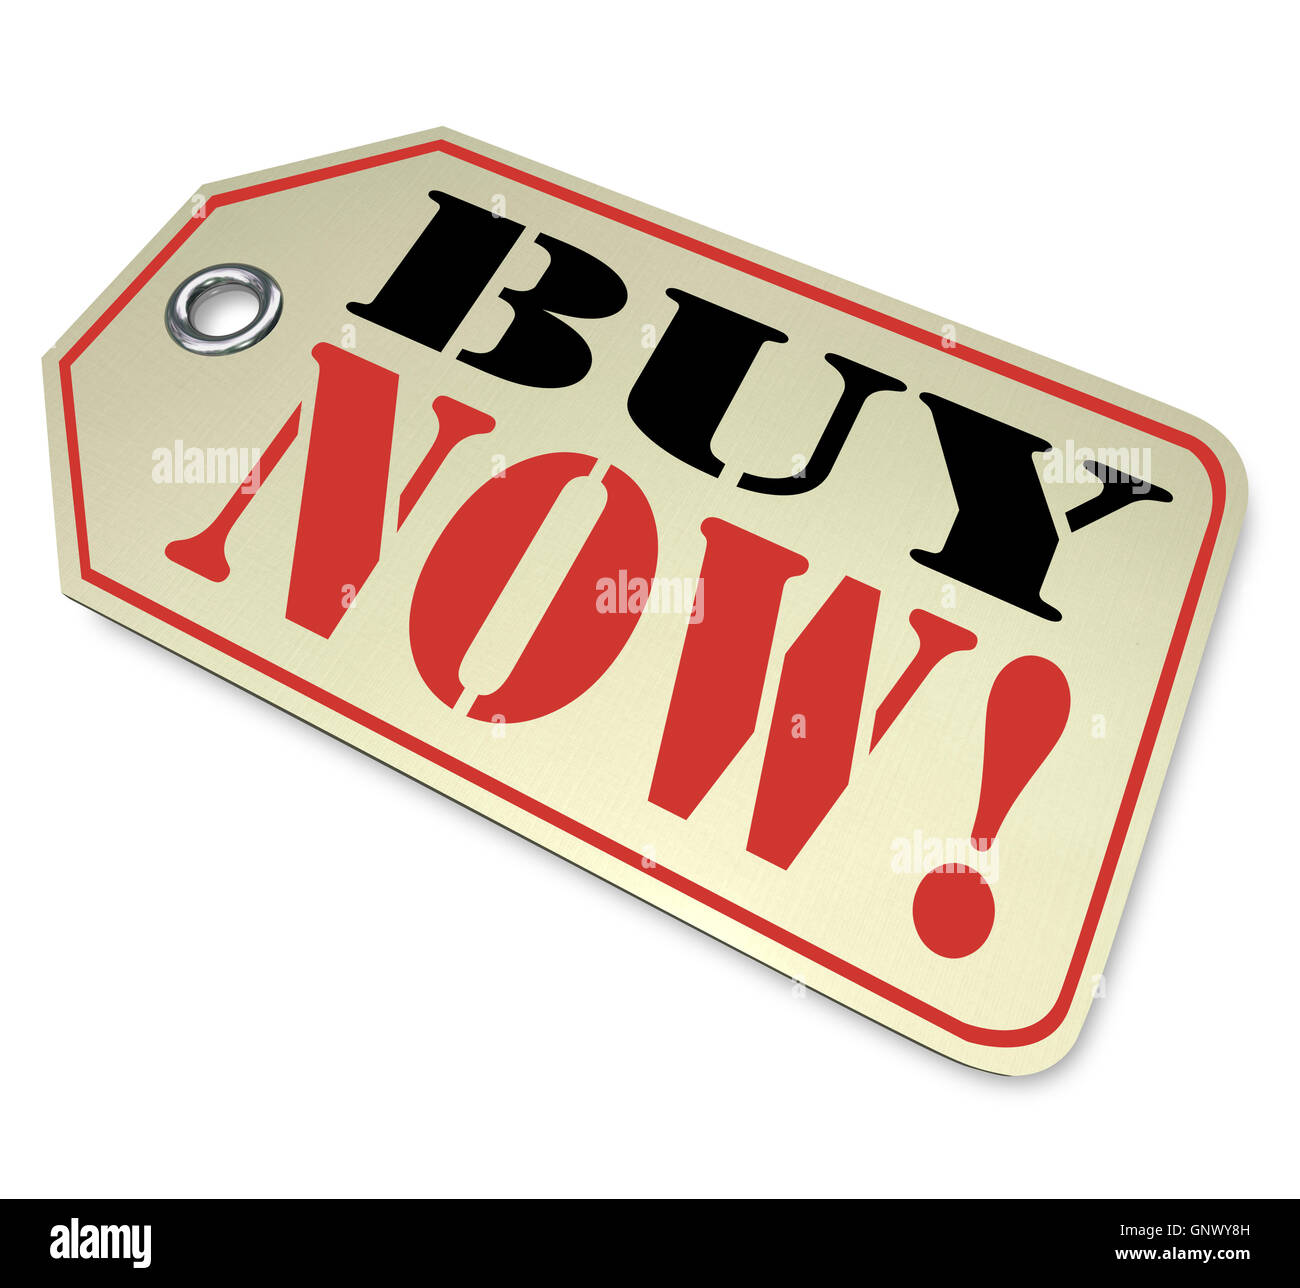 Buy Now Tag Attached to Sale Item Discount Merchandise Stock Photo